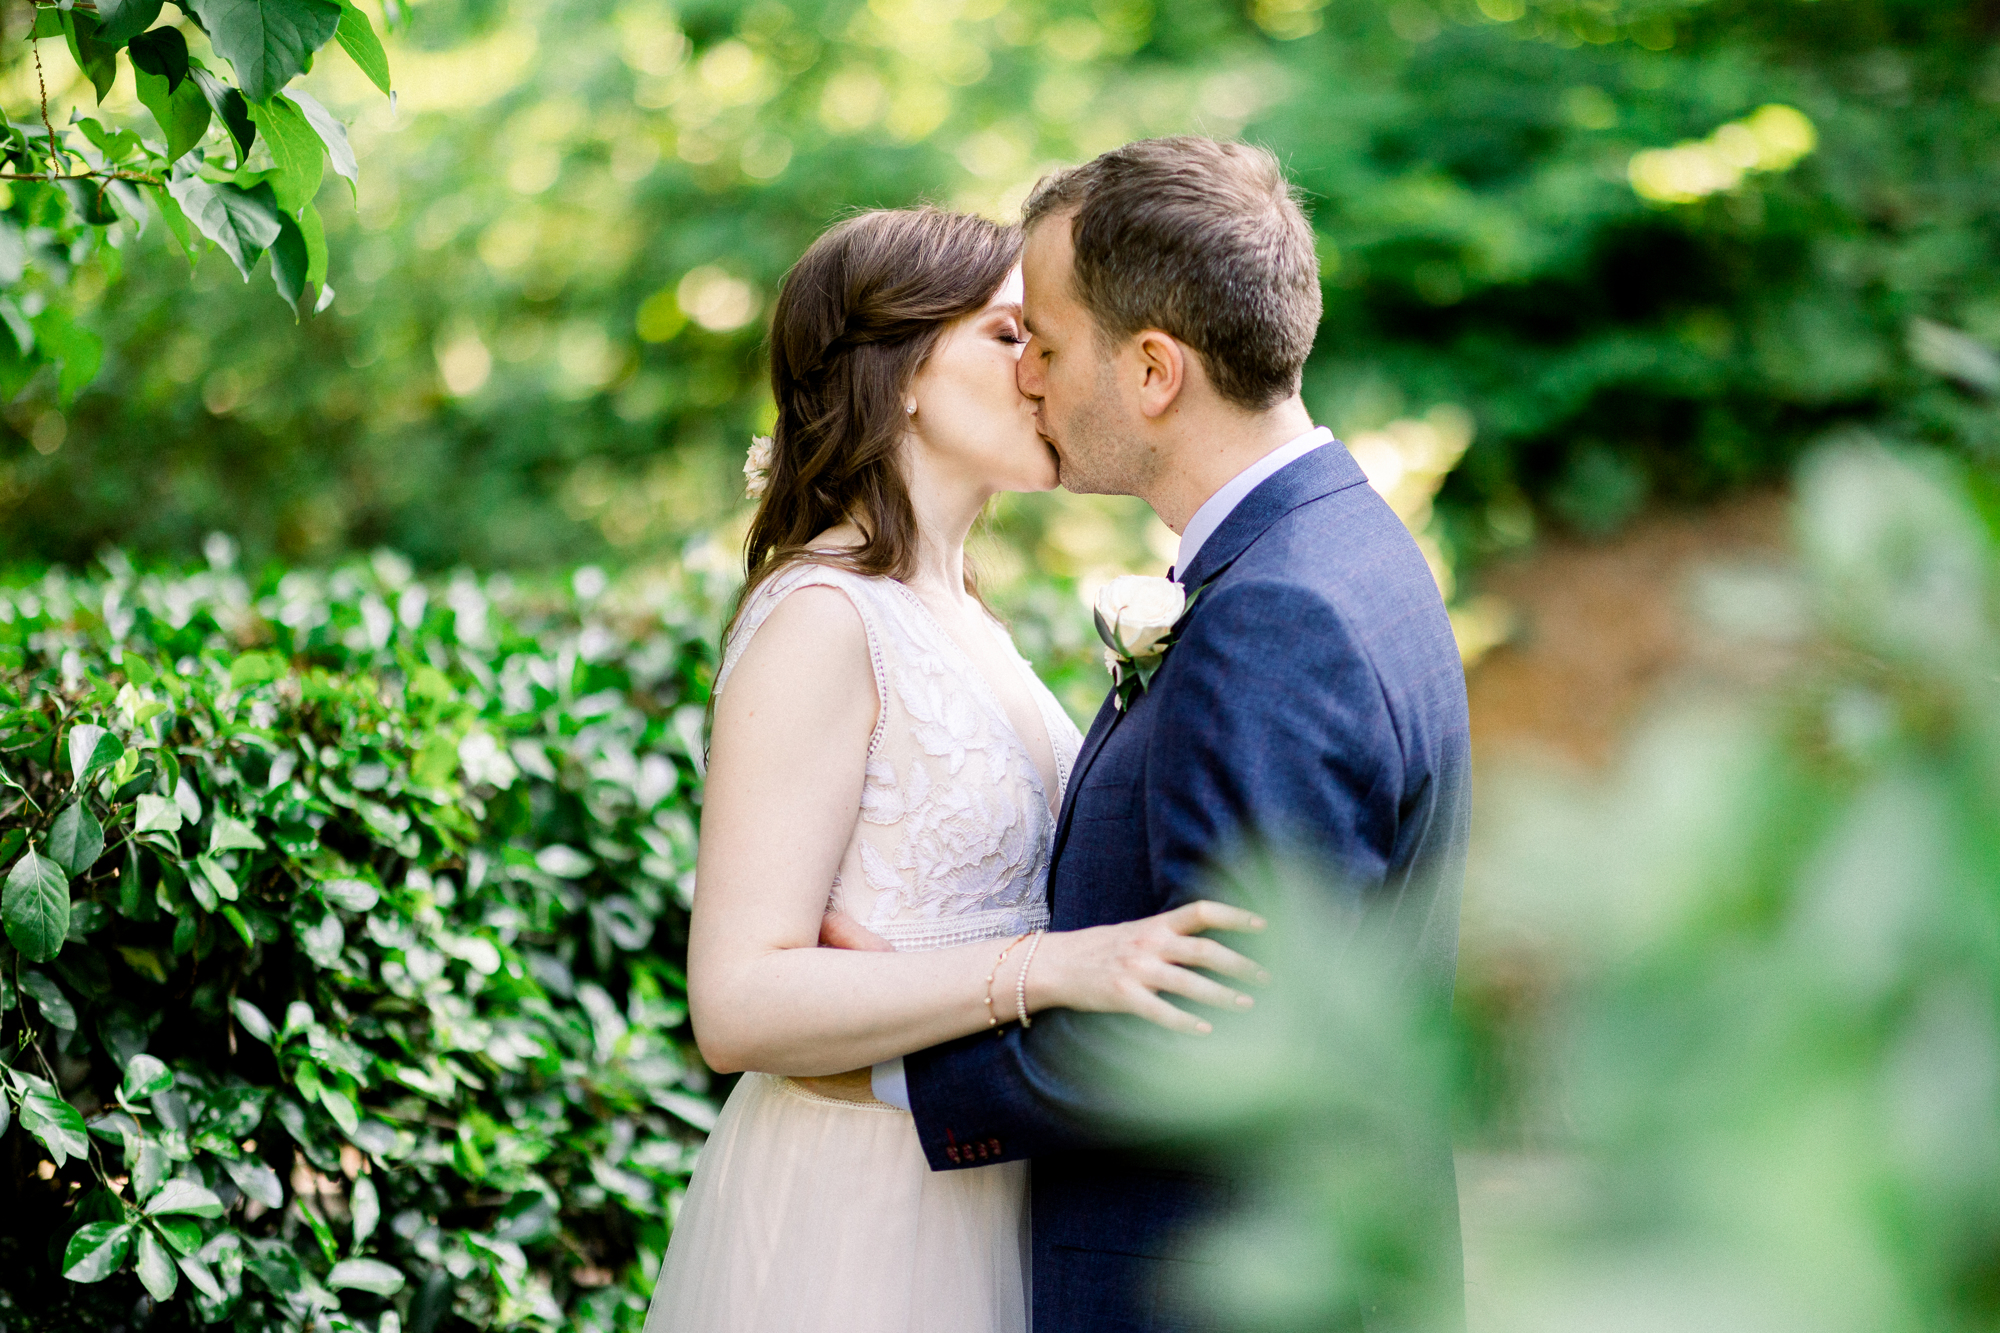 Magical Summer Wedding Photos at the Conservatory Garden in Central Park New York